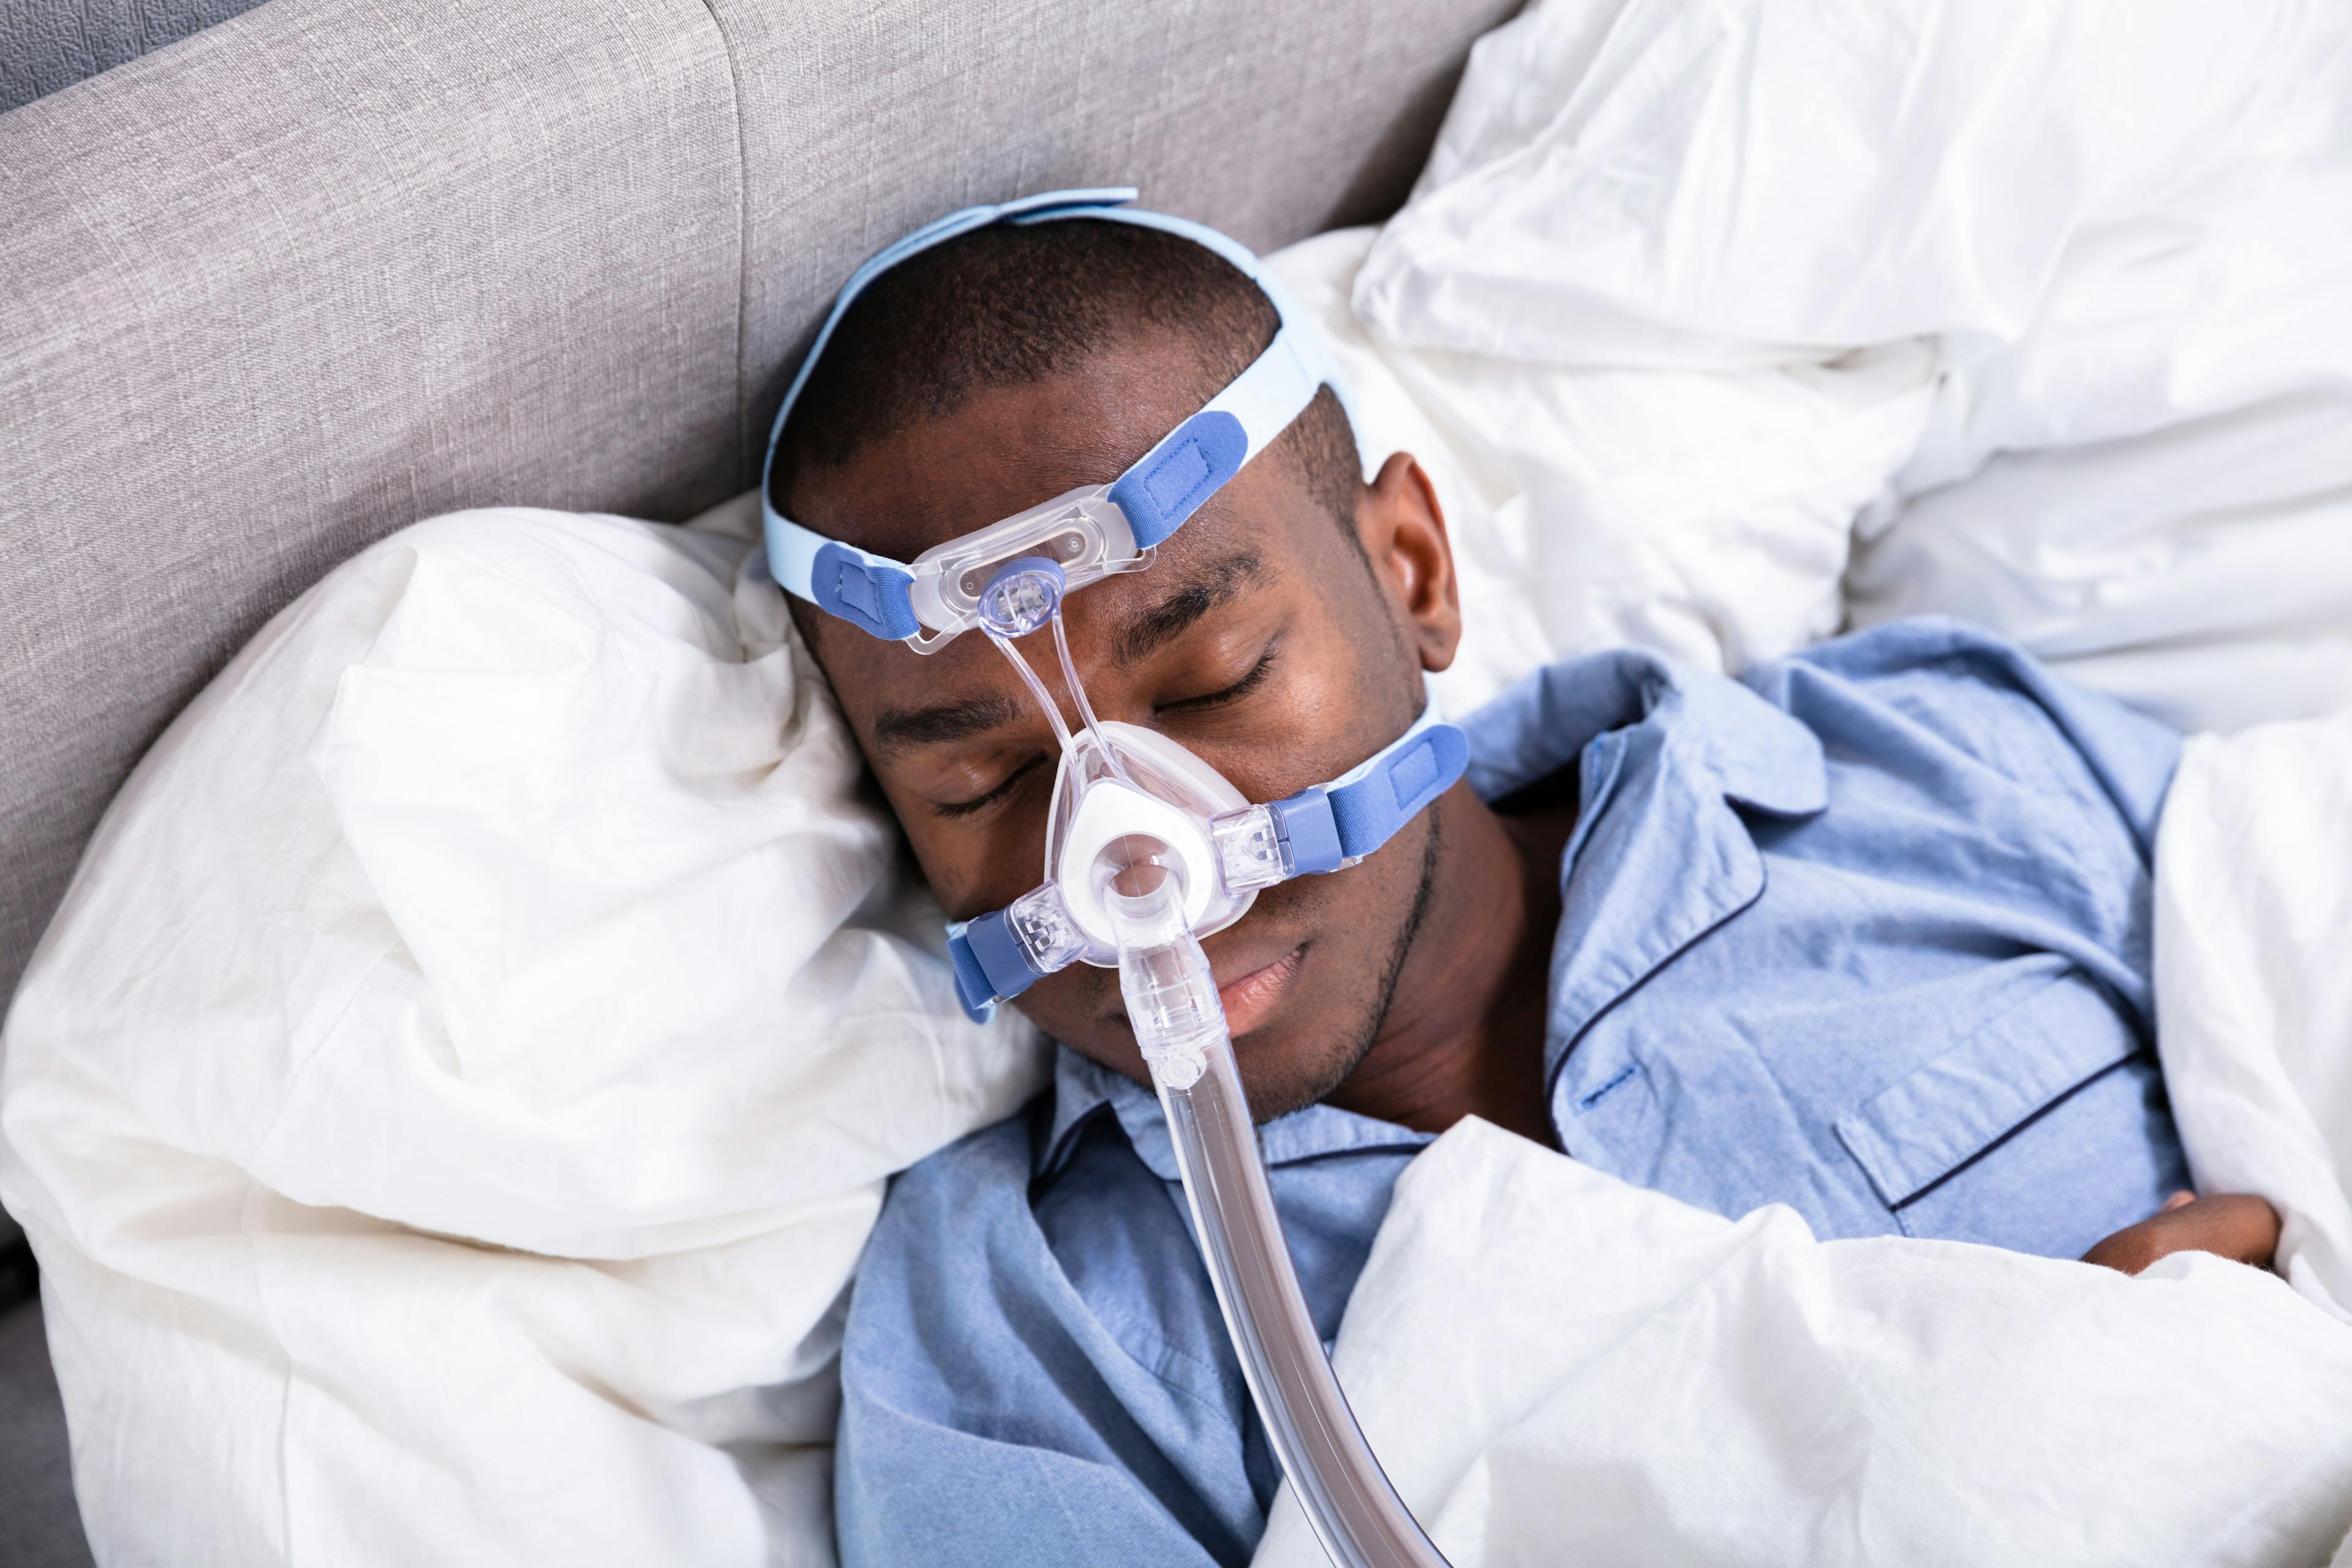 Treating Sleep Apnea With CPAP Therapy Lowers the Risk of Heart Problems, COVID-19